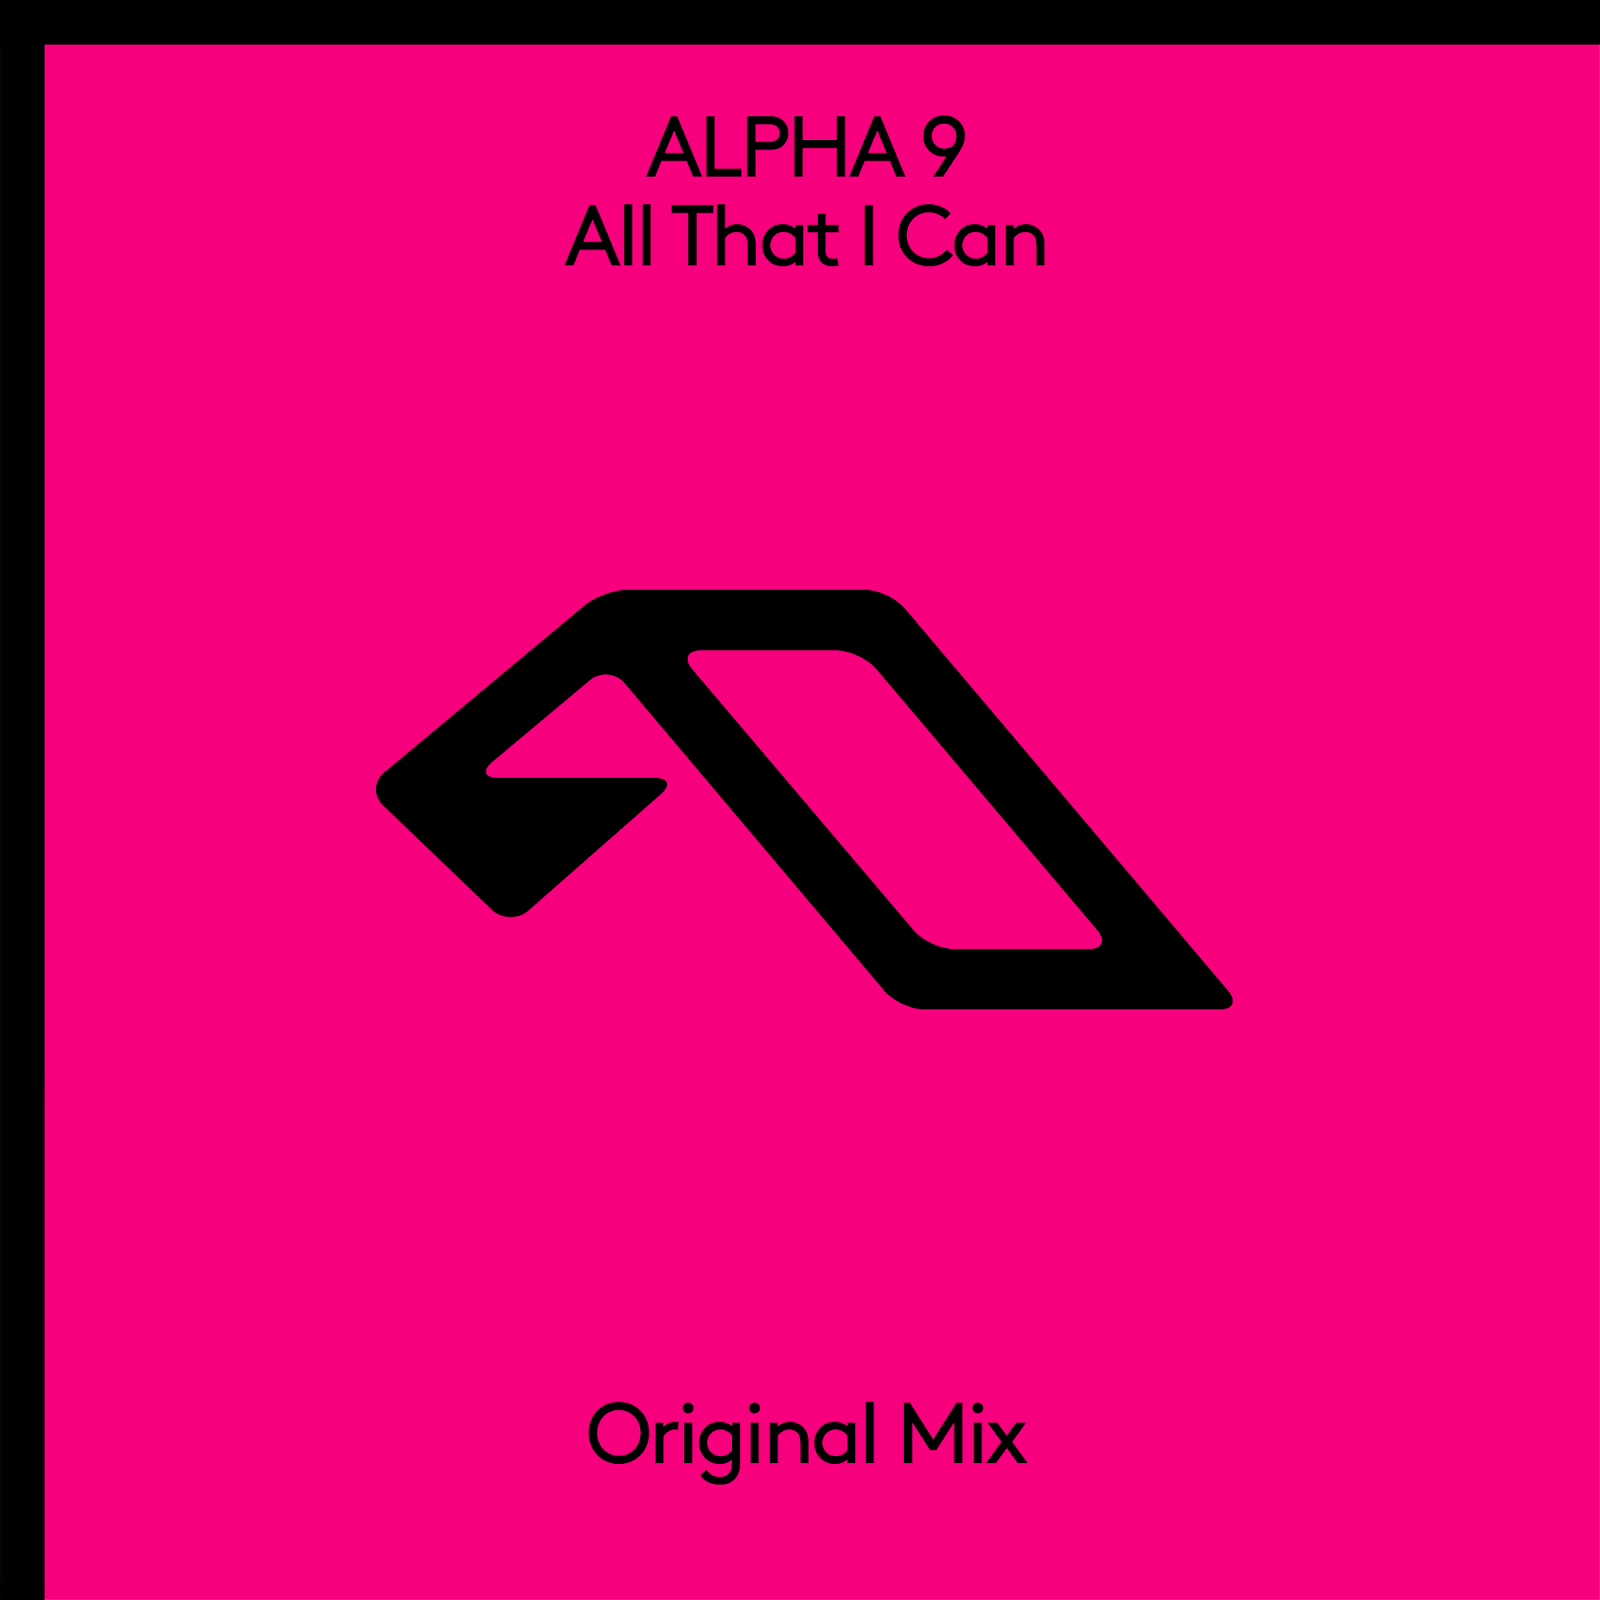 ALPHA 9 presents All That I Can on Anjunabeats